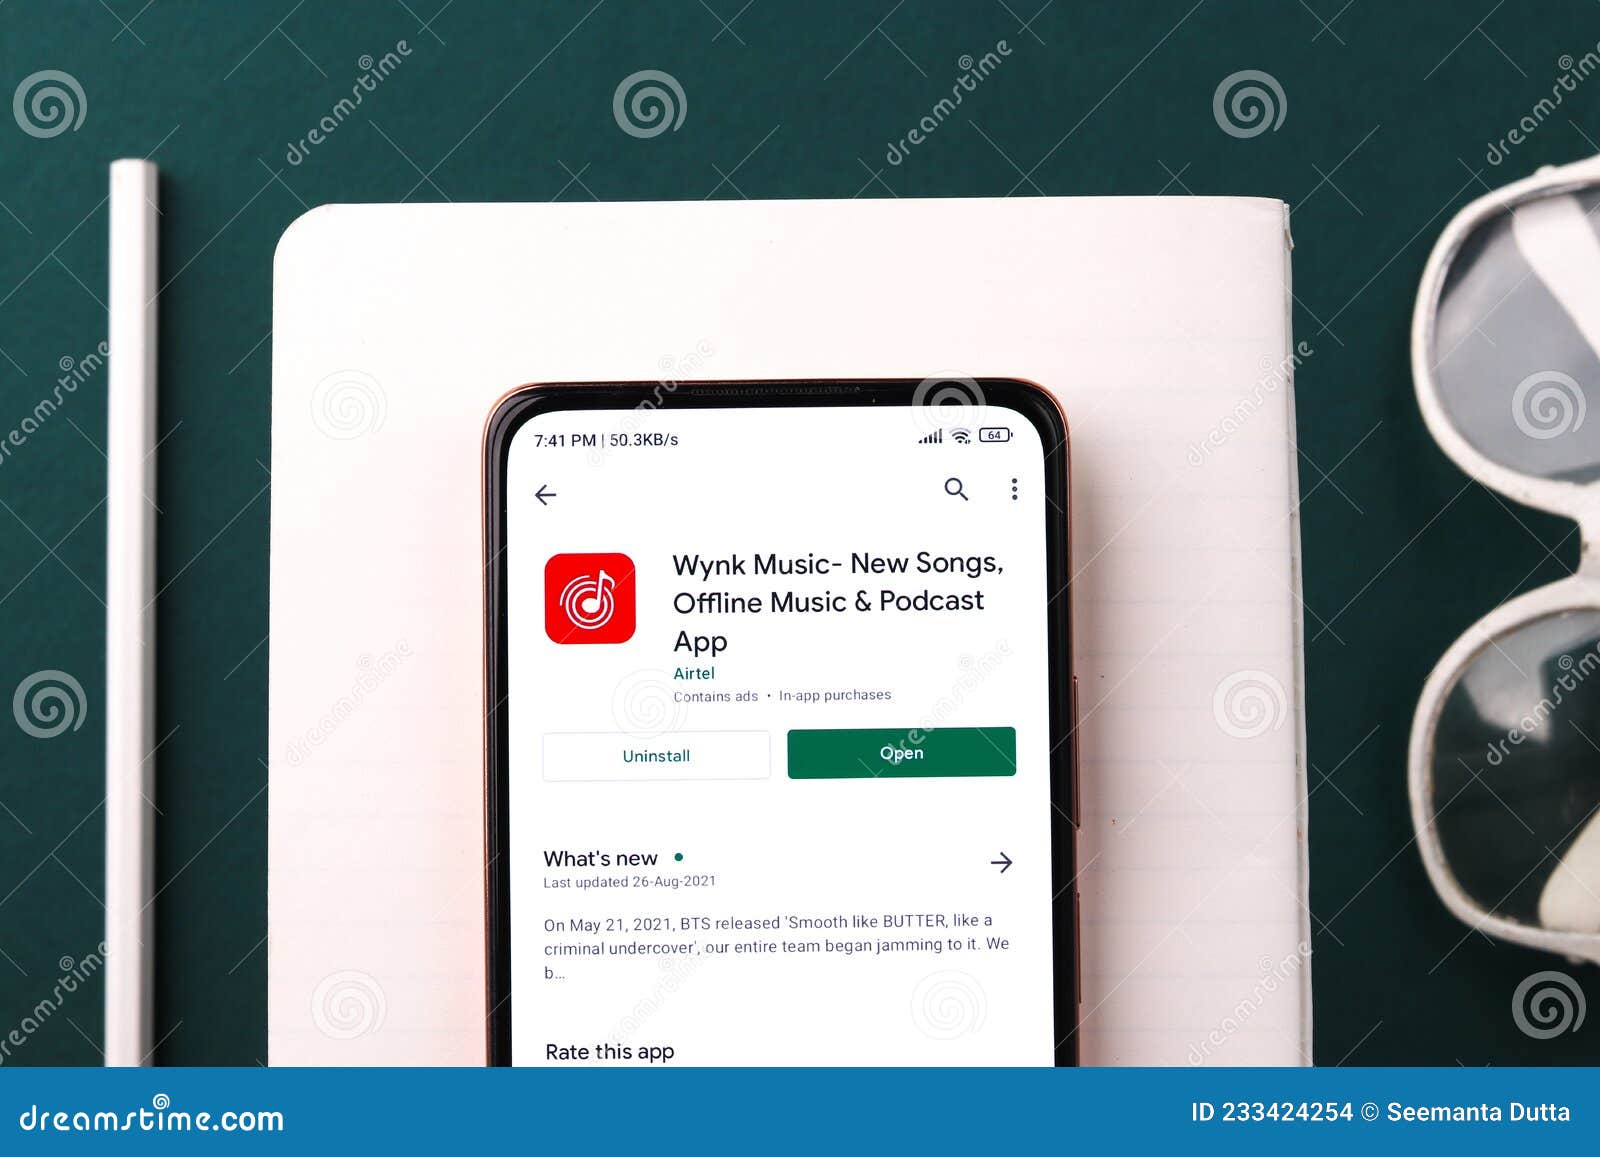 Wynk Music Plans Foray Into Distribution Ecosystem; to Invest Rs. 100 Crore  to Promote Music Talent | Technology News